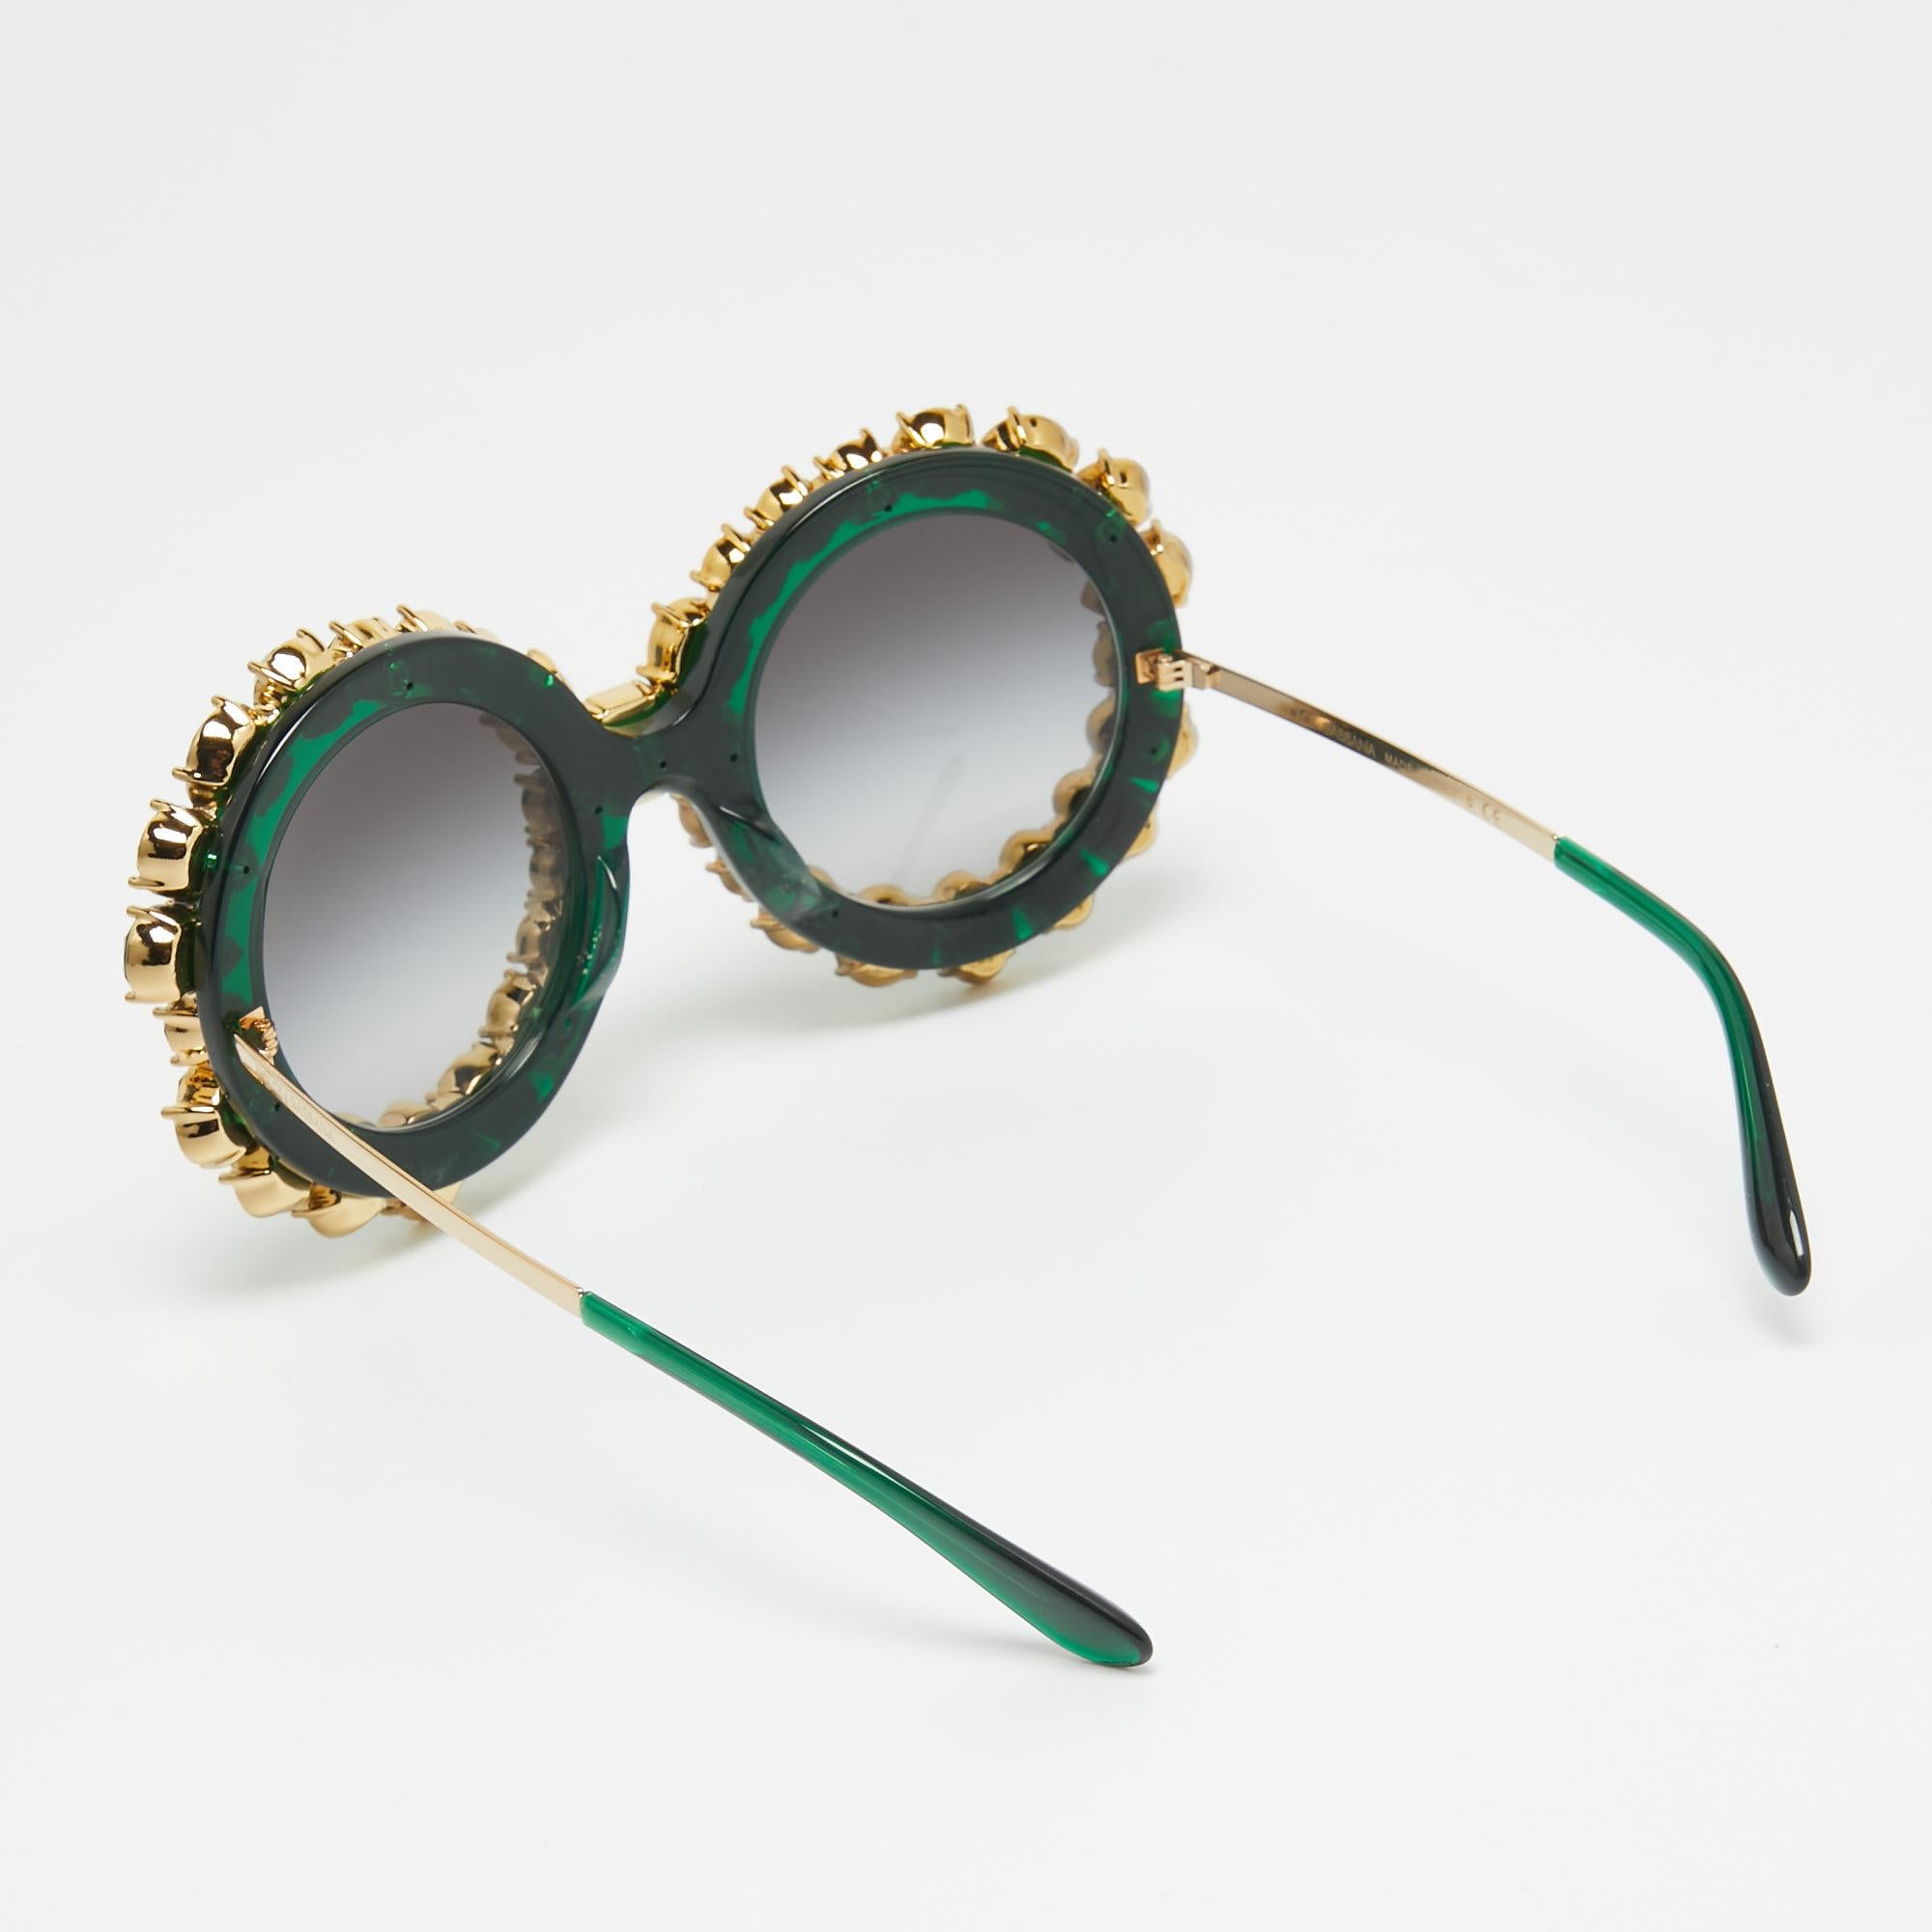 Crafted for the fashion-forward, the Dolce & Gabbana limited edition DG4291 sunglasses exude opulence. Their sleek round frames, adorned with exquisite crystals, radiate elegance. The gradient green lenses offer both style and sun protection, making